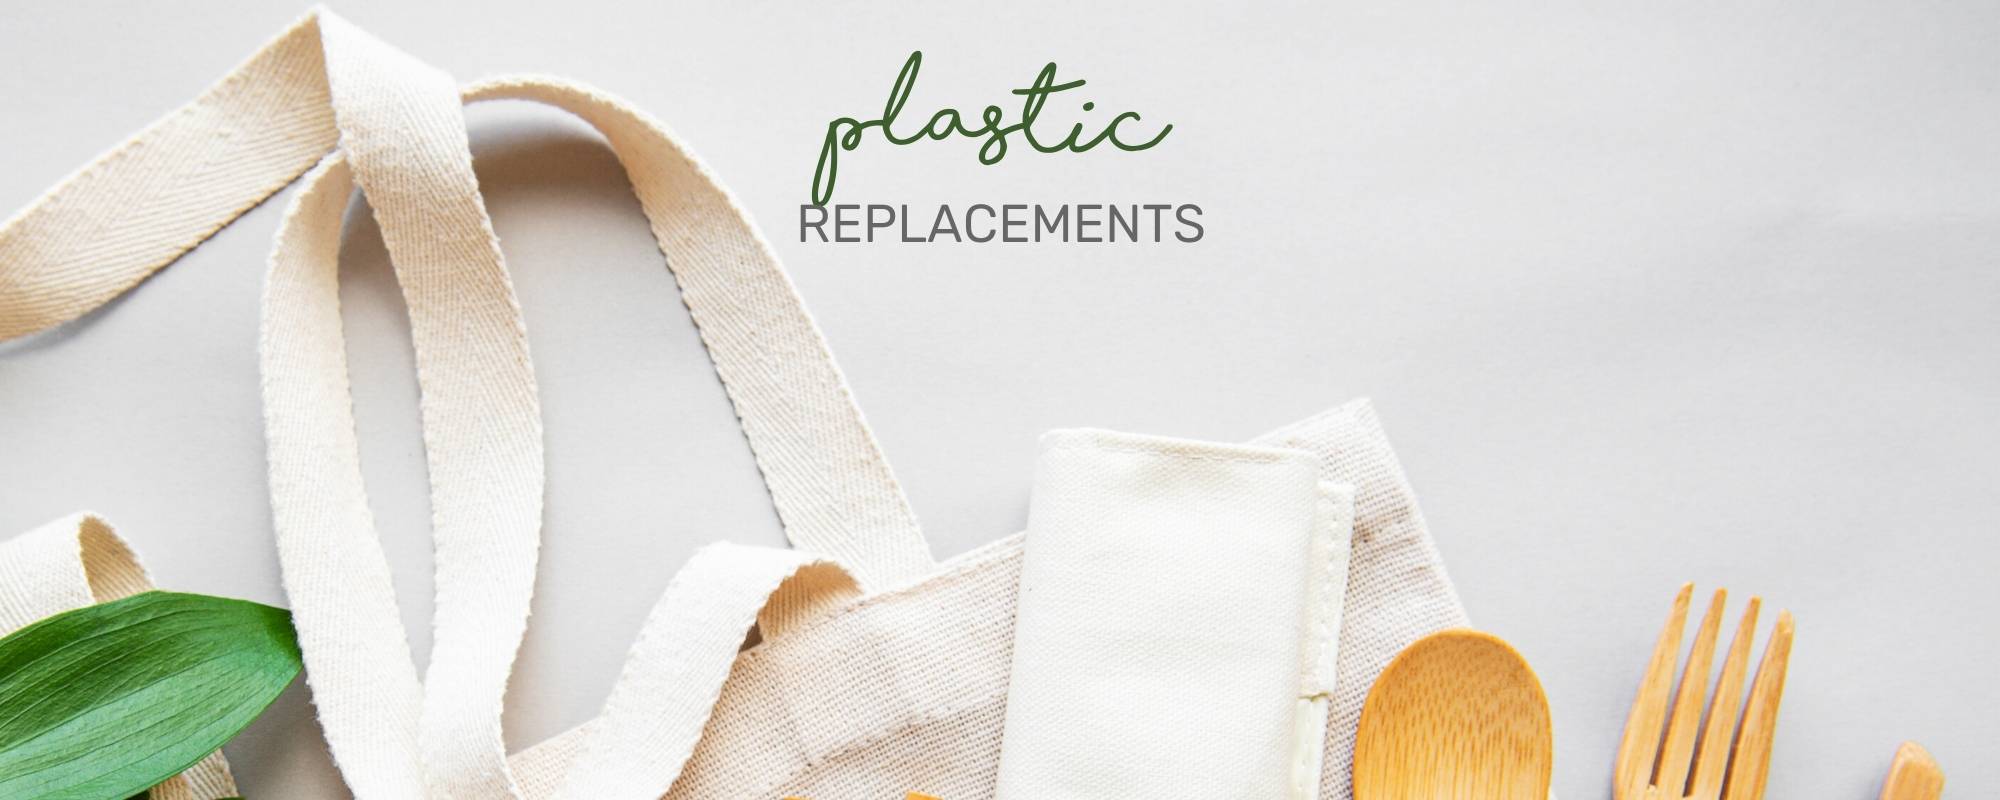 5 PLASTIC REPLACEMENTS